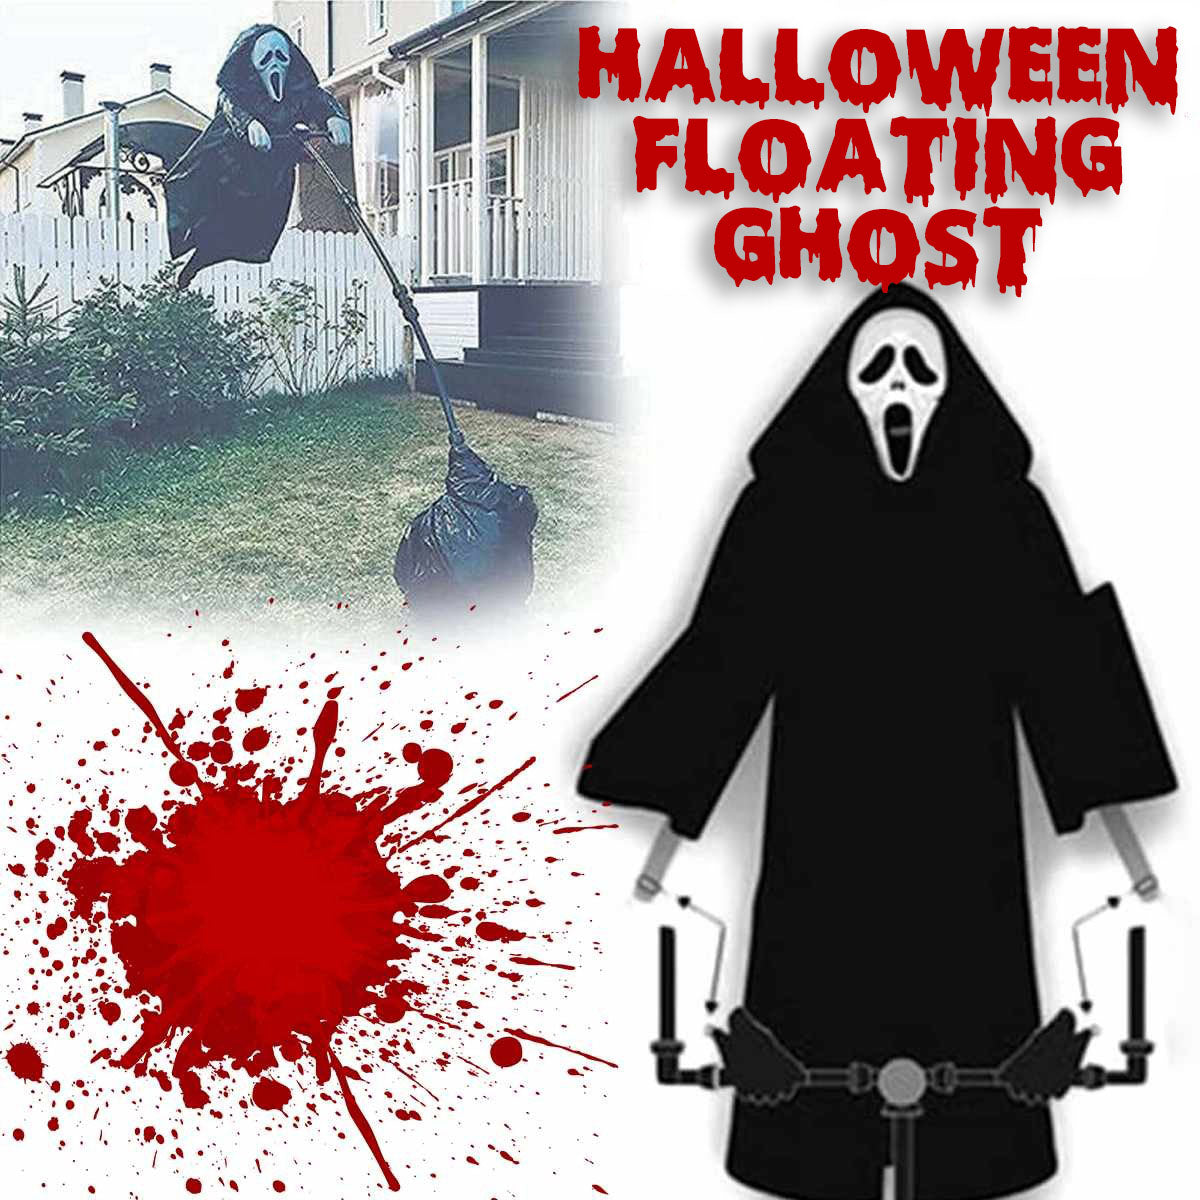 Halloween Floating Ghost Decoration